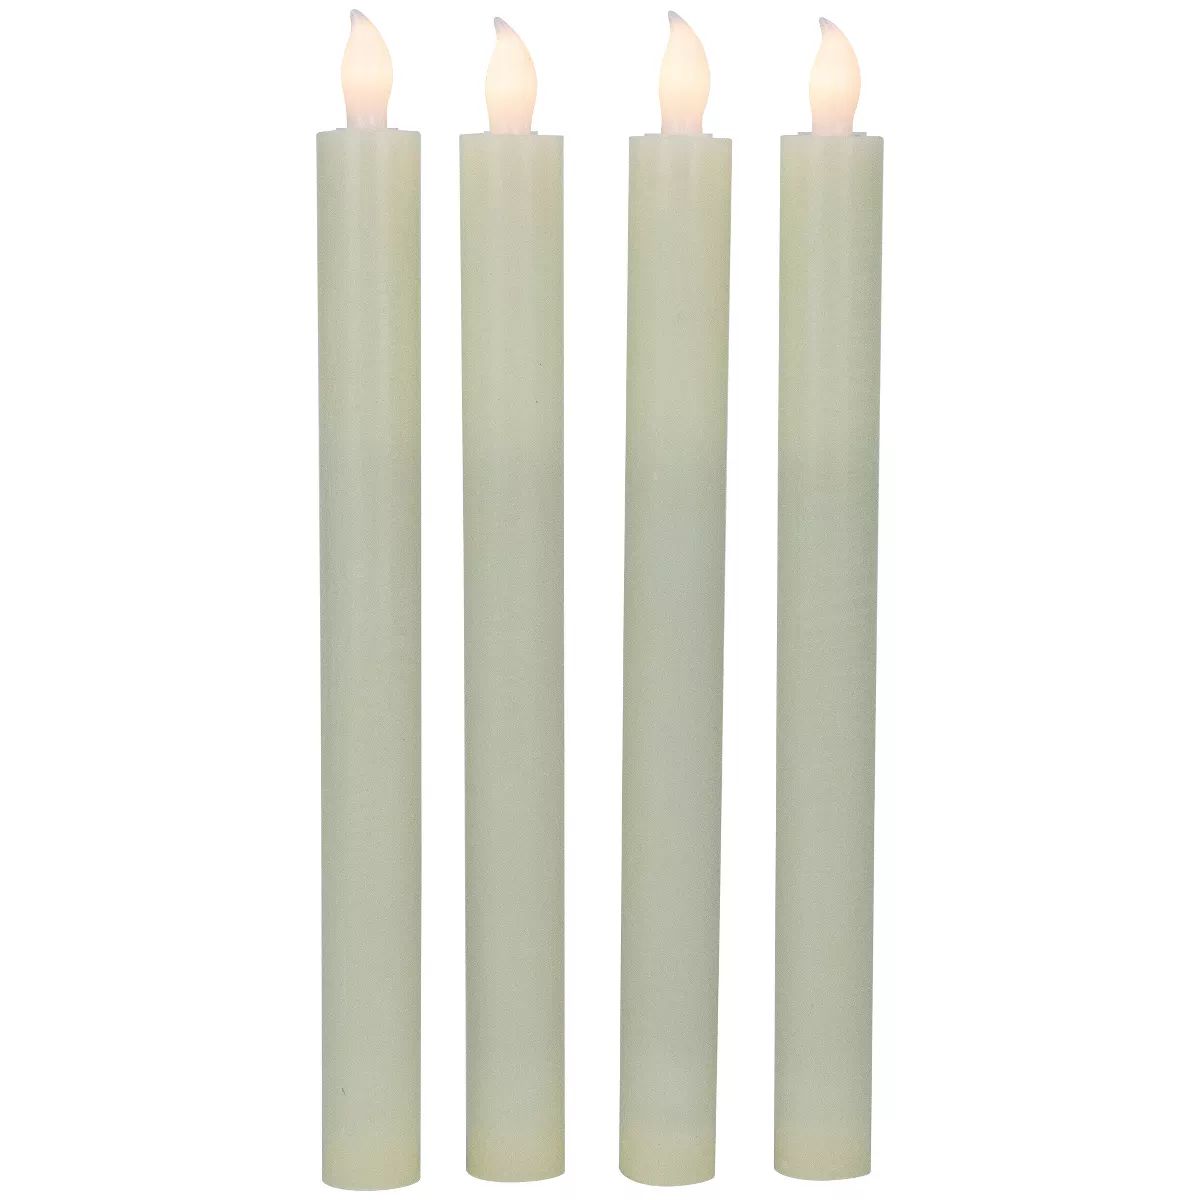 Northlight Set of 4 Solid Cream Flameless LED Constant Wax Taper Candles 9.5" | Target